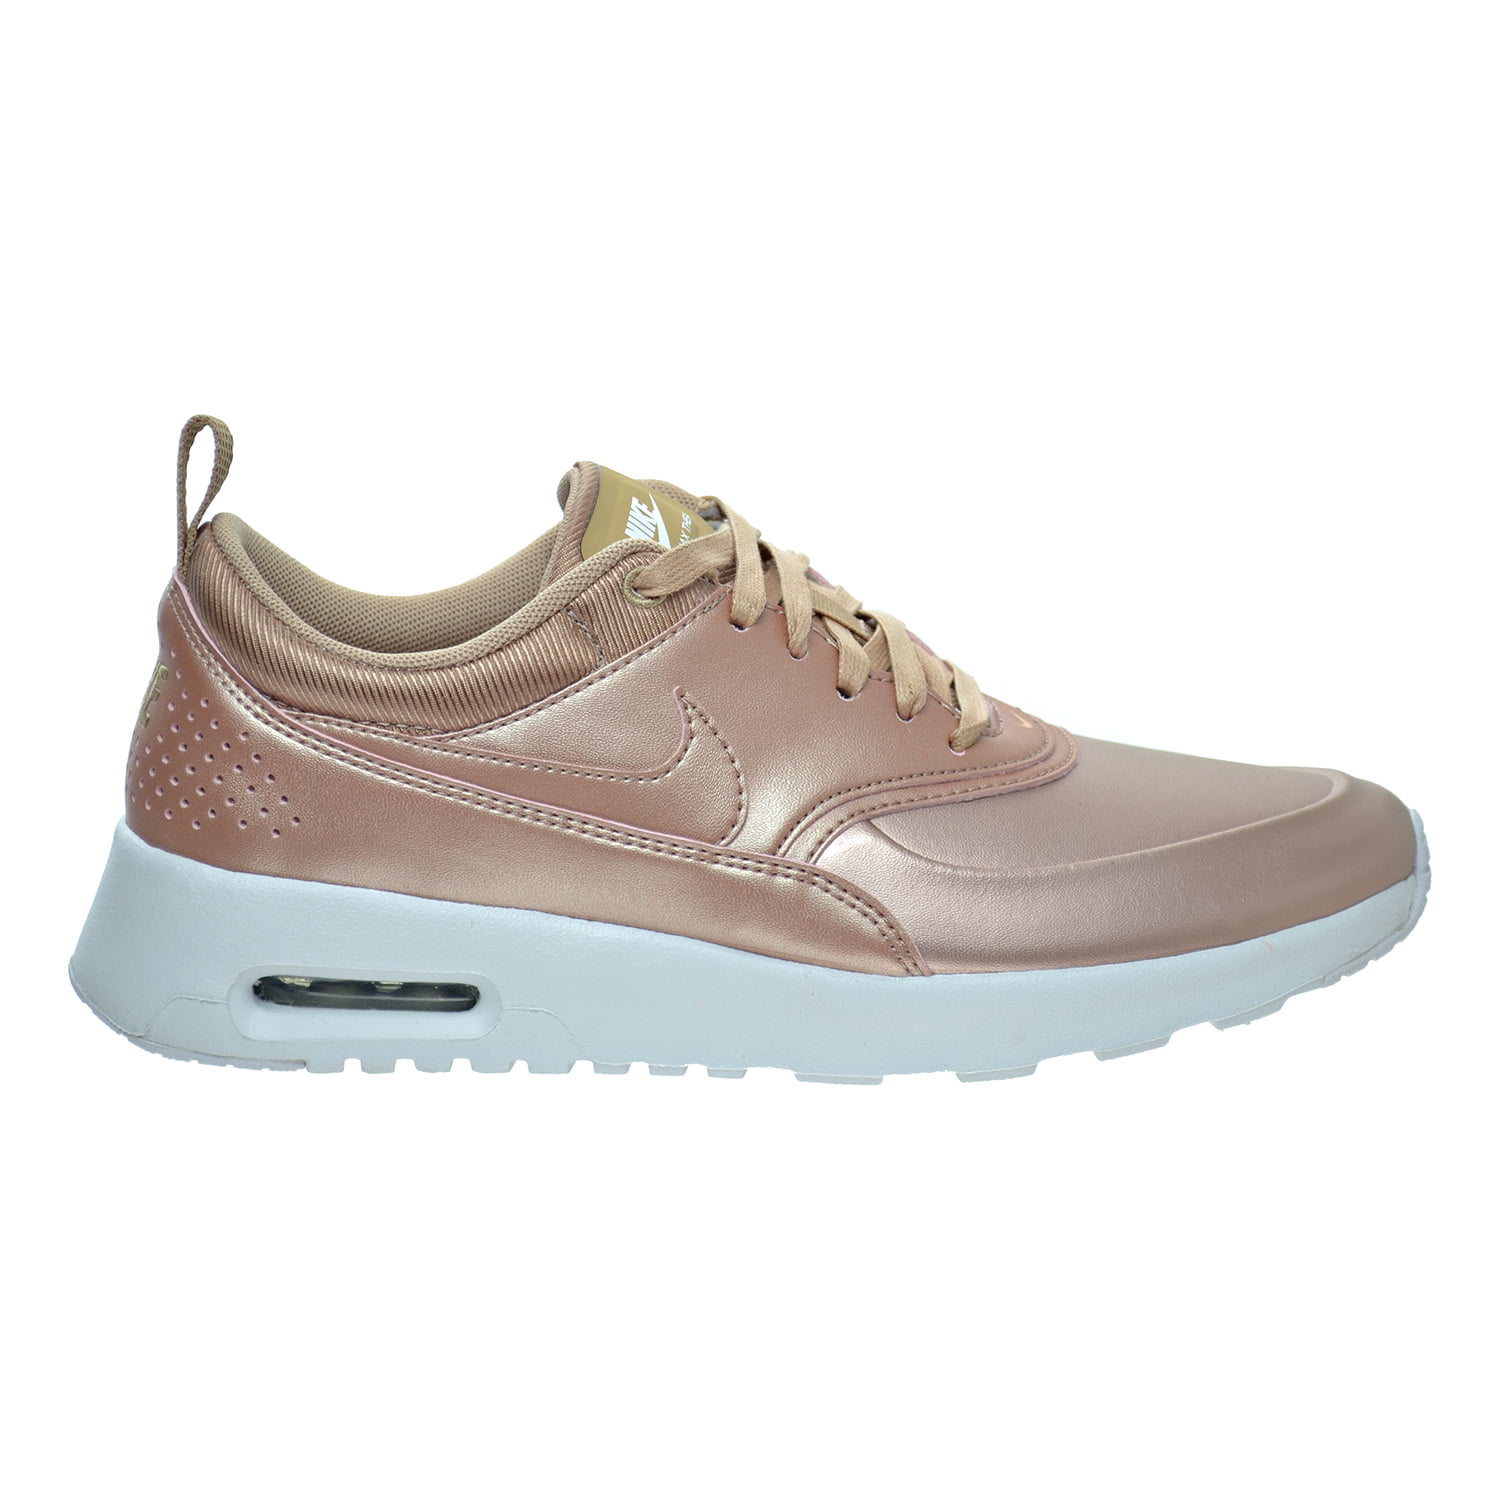 wmns nike air max thea se metallic red bronze womens running shoes